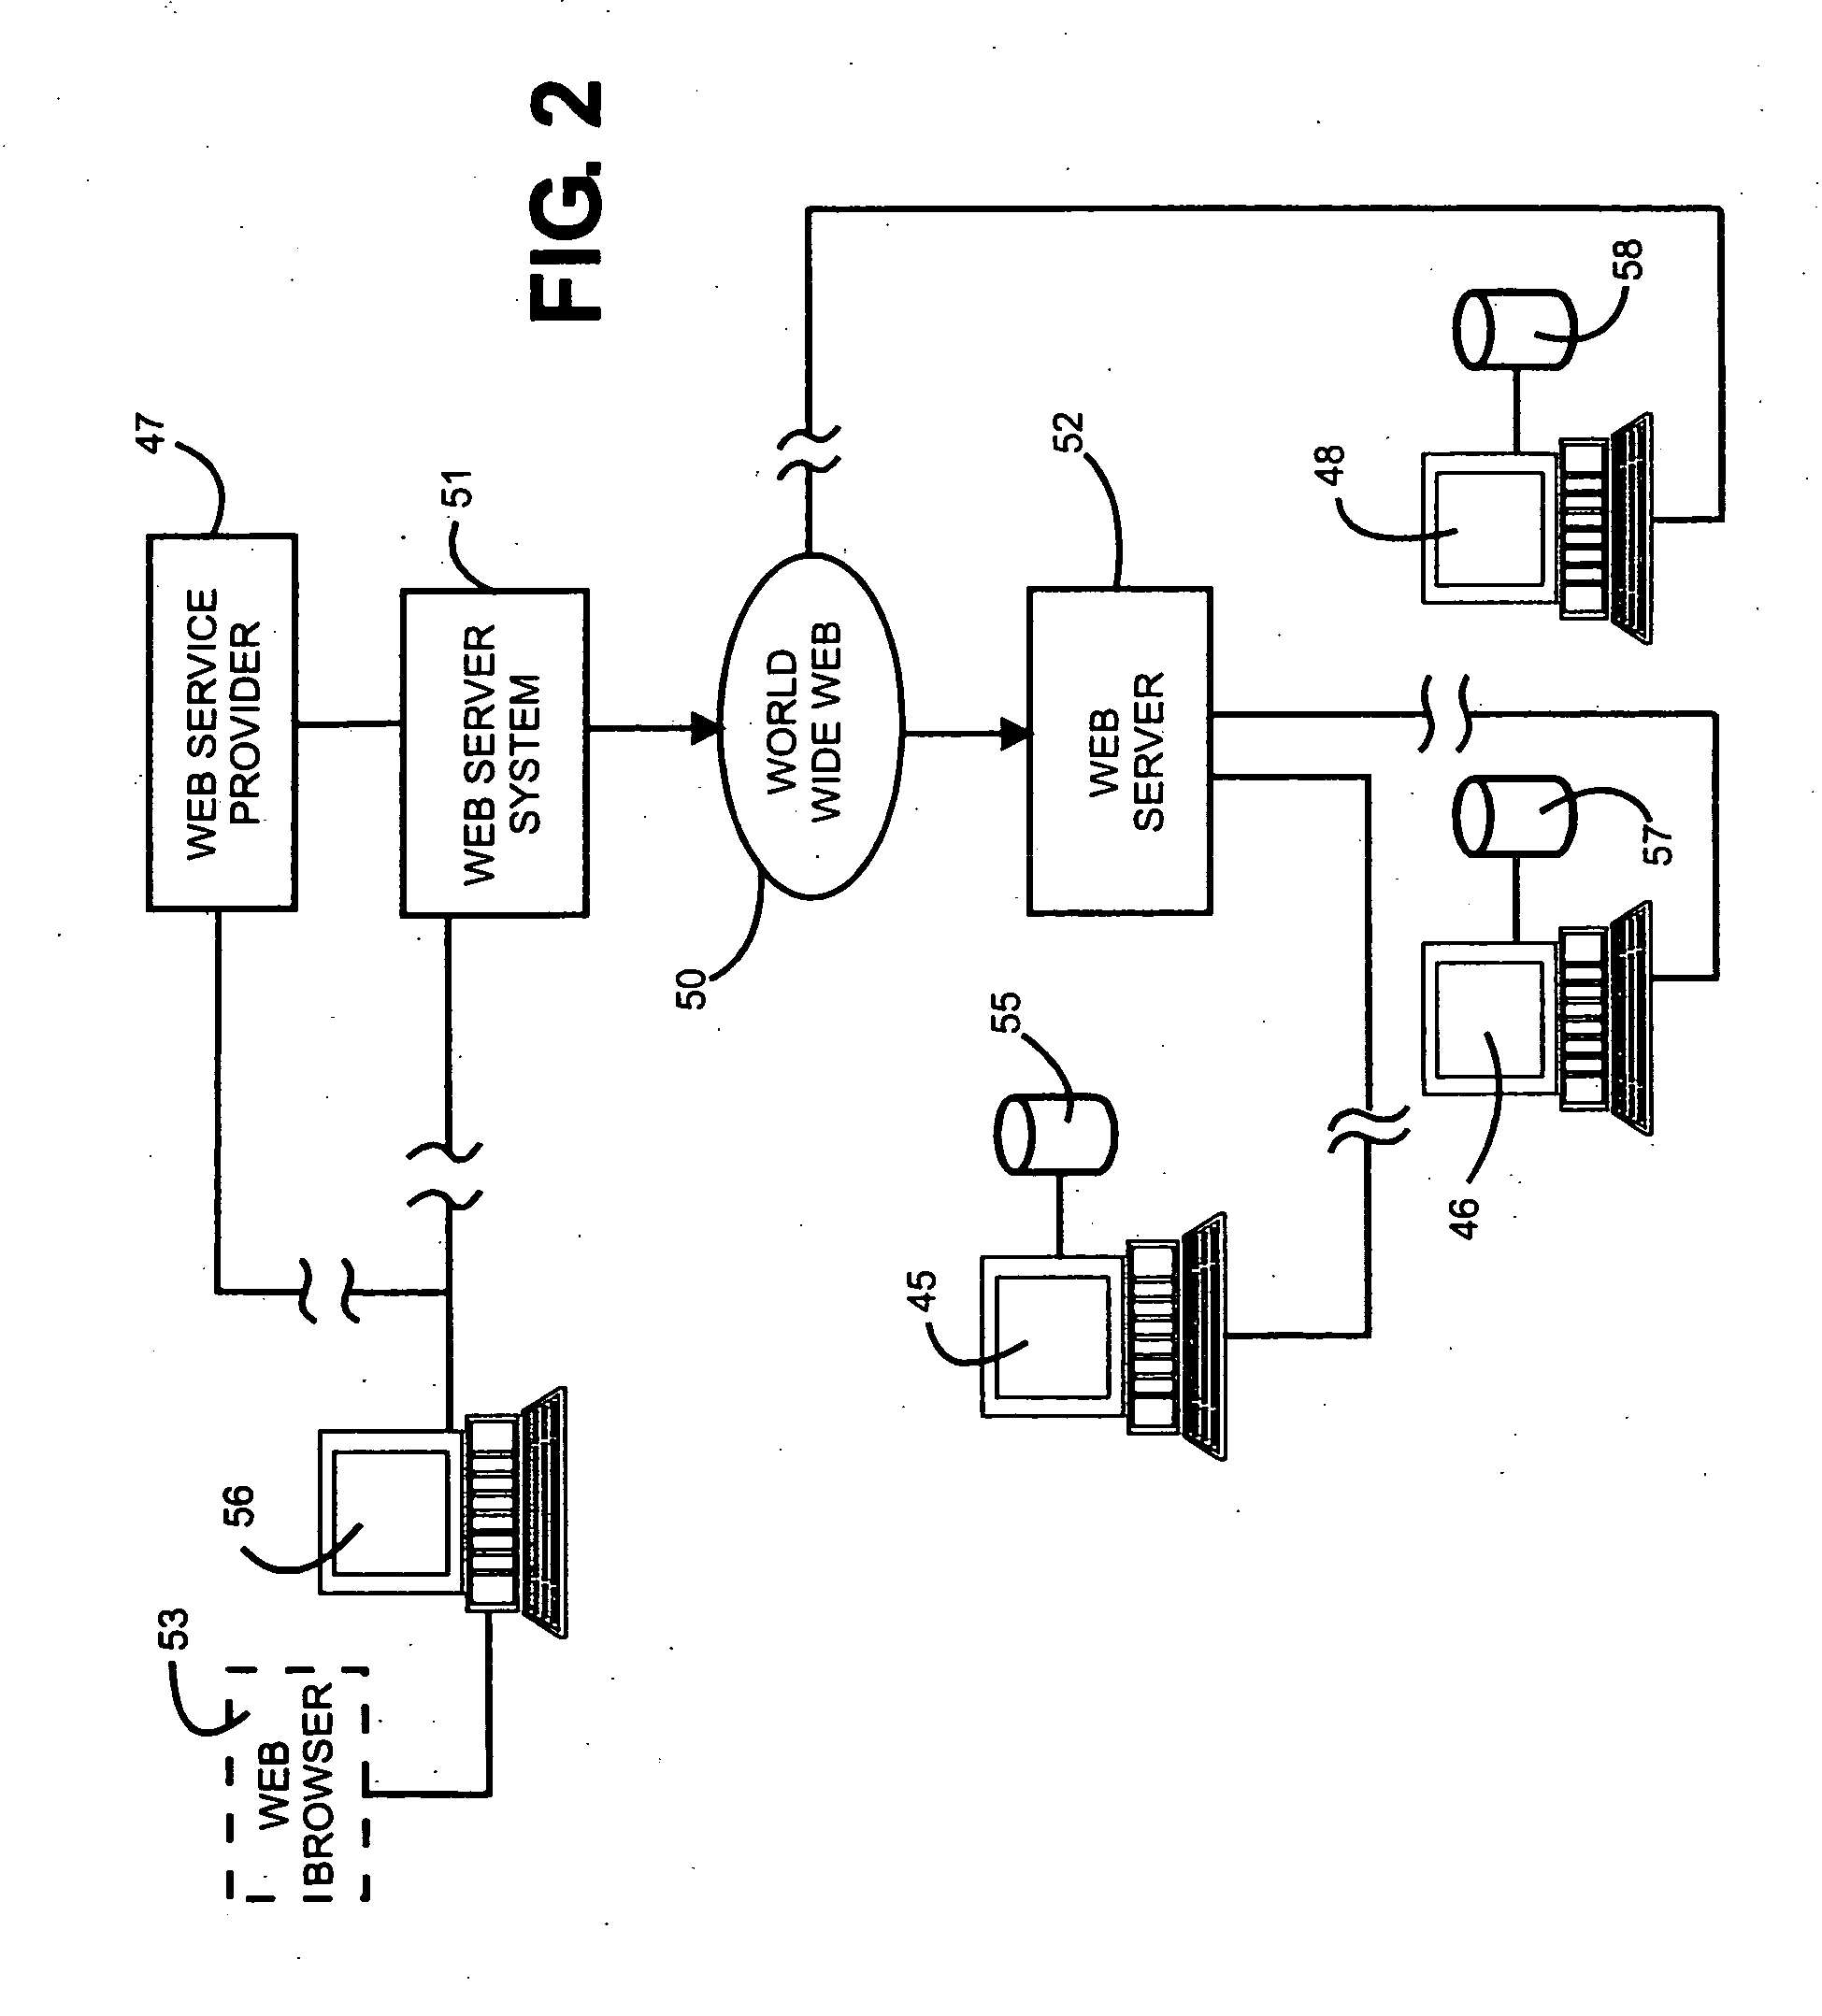 System for creating markup language documents at a receiving display station having multiple contexts from multiple secured sources on a communication network, e.g. the web with visual indicators for identifying content and security